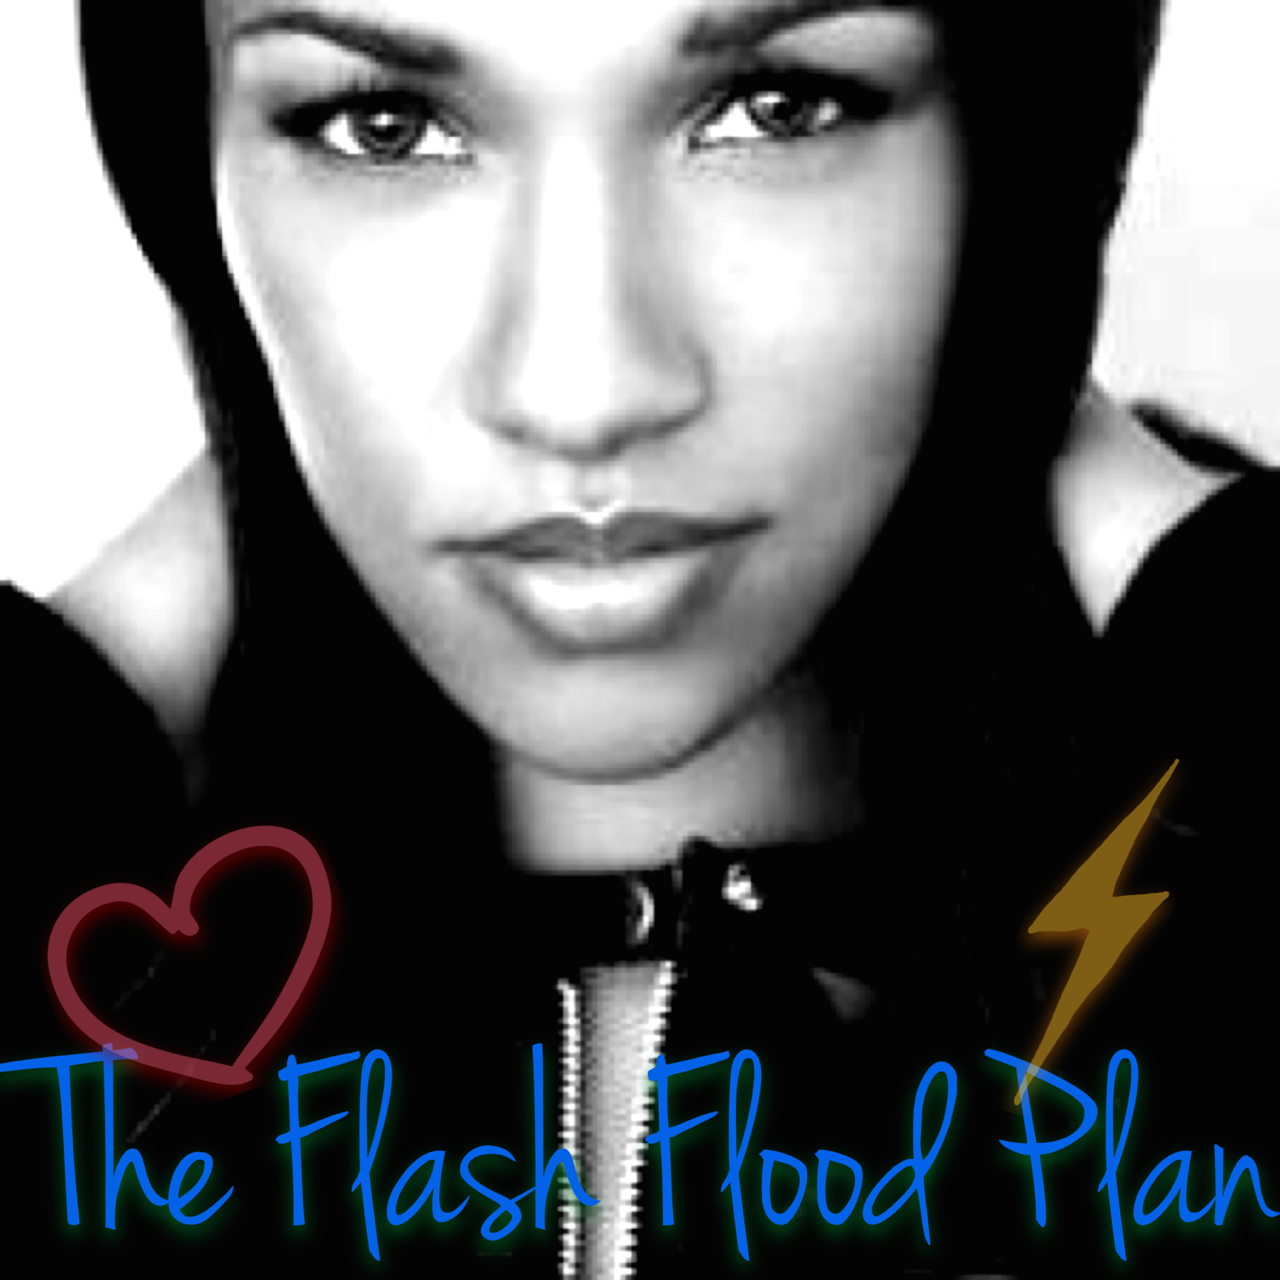 theflashfloodplan:
“Operation:
“ FLOOD POSITIVITY & PROMOTE IRIS WEST / WESTALLEN
”
“Our mission is to promote Candice Patton, Iris West & Westallen on as many social networking sites as possible, with a focus in Twitter and Tumblr. We need changes...